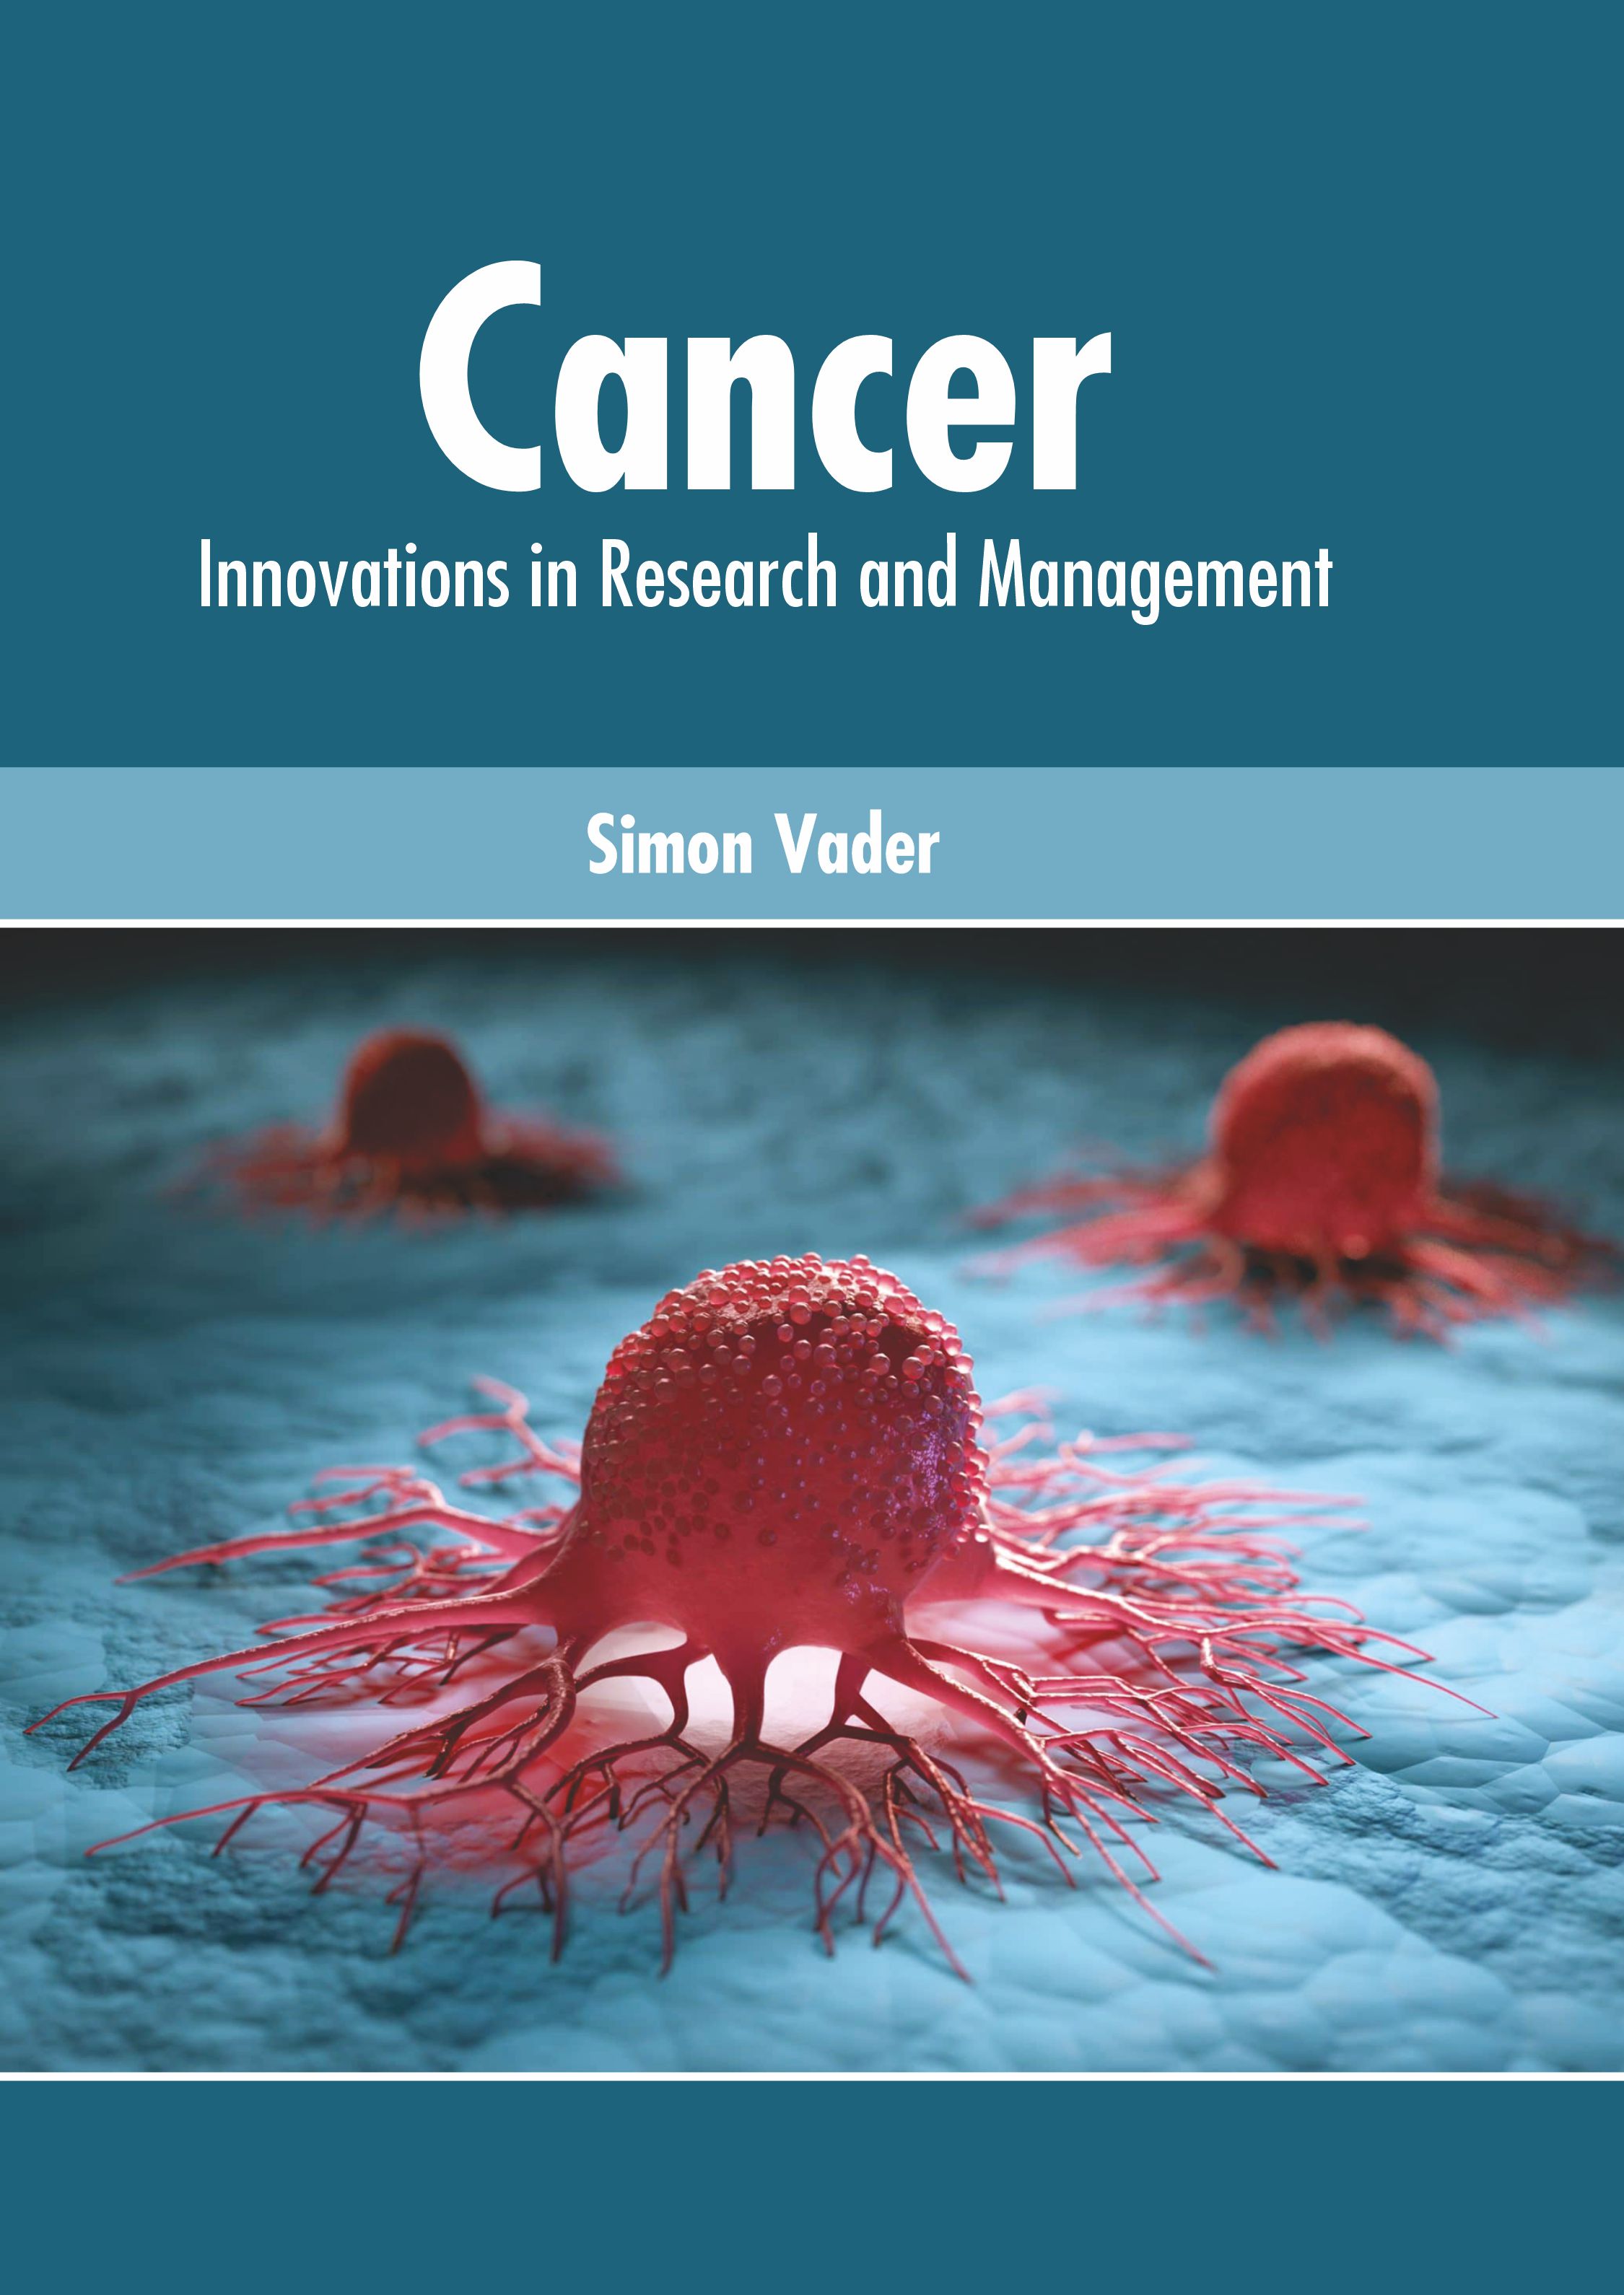 CANCER: INNOVATIONS IN RESEARCH AND MANAGEMENT